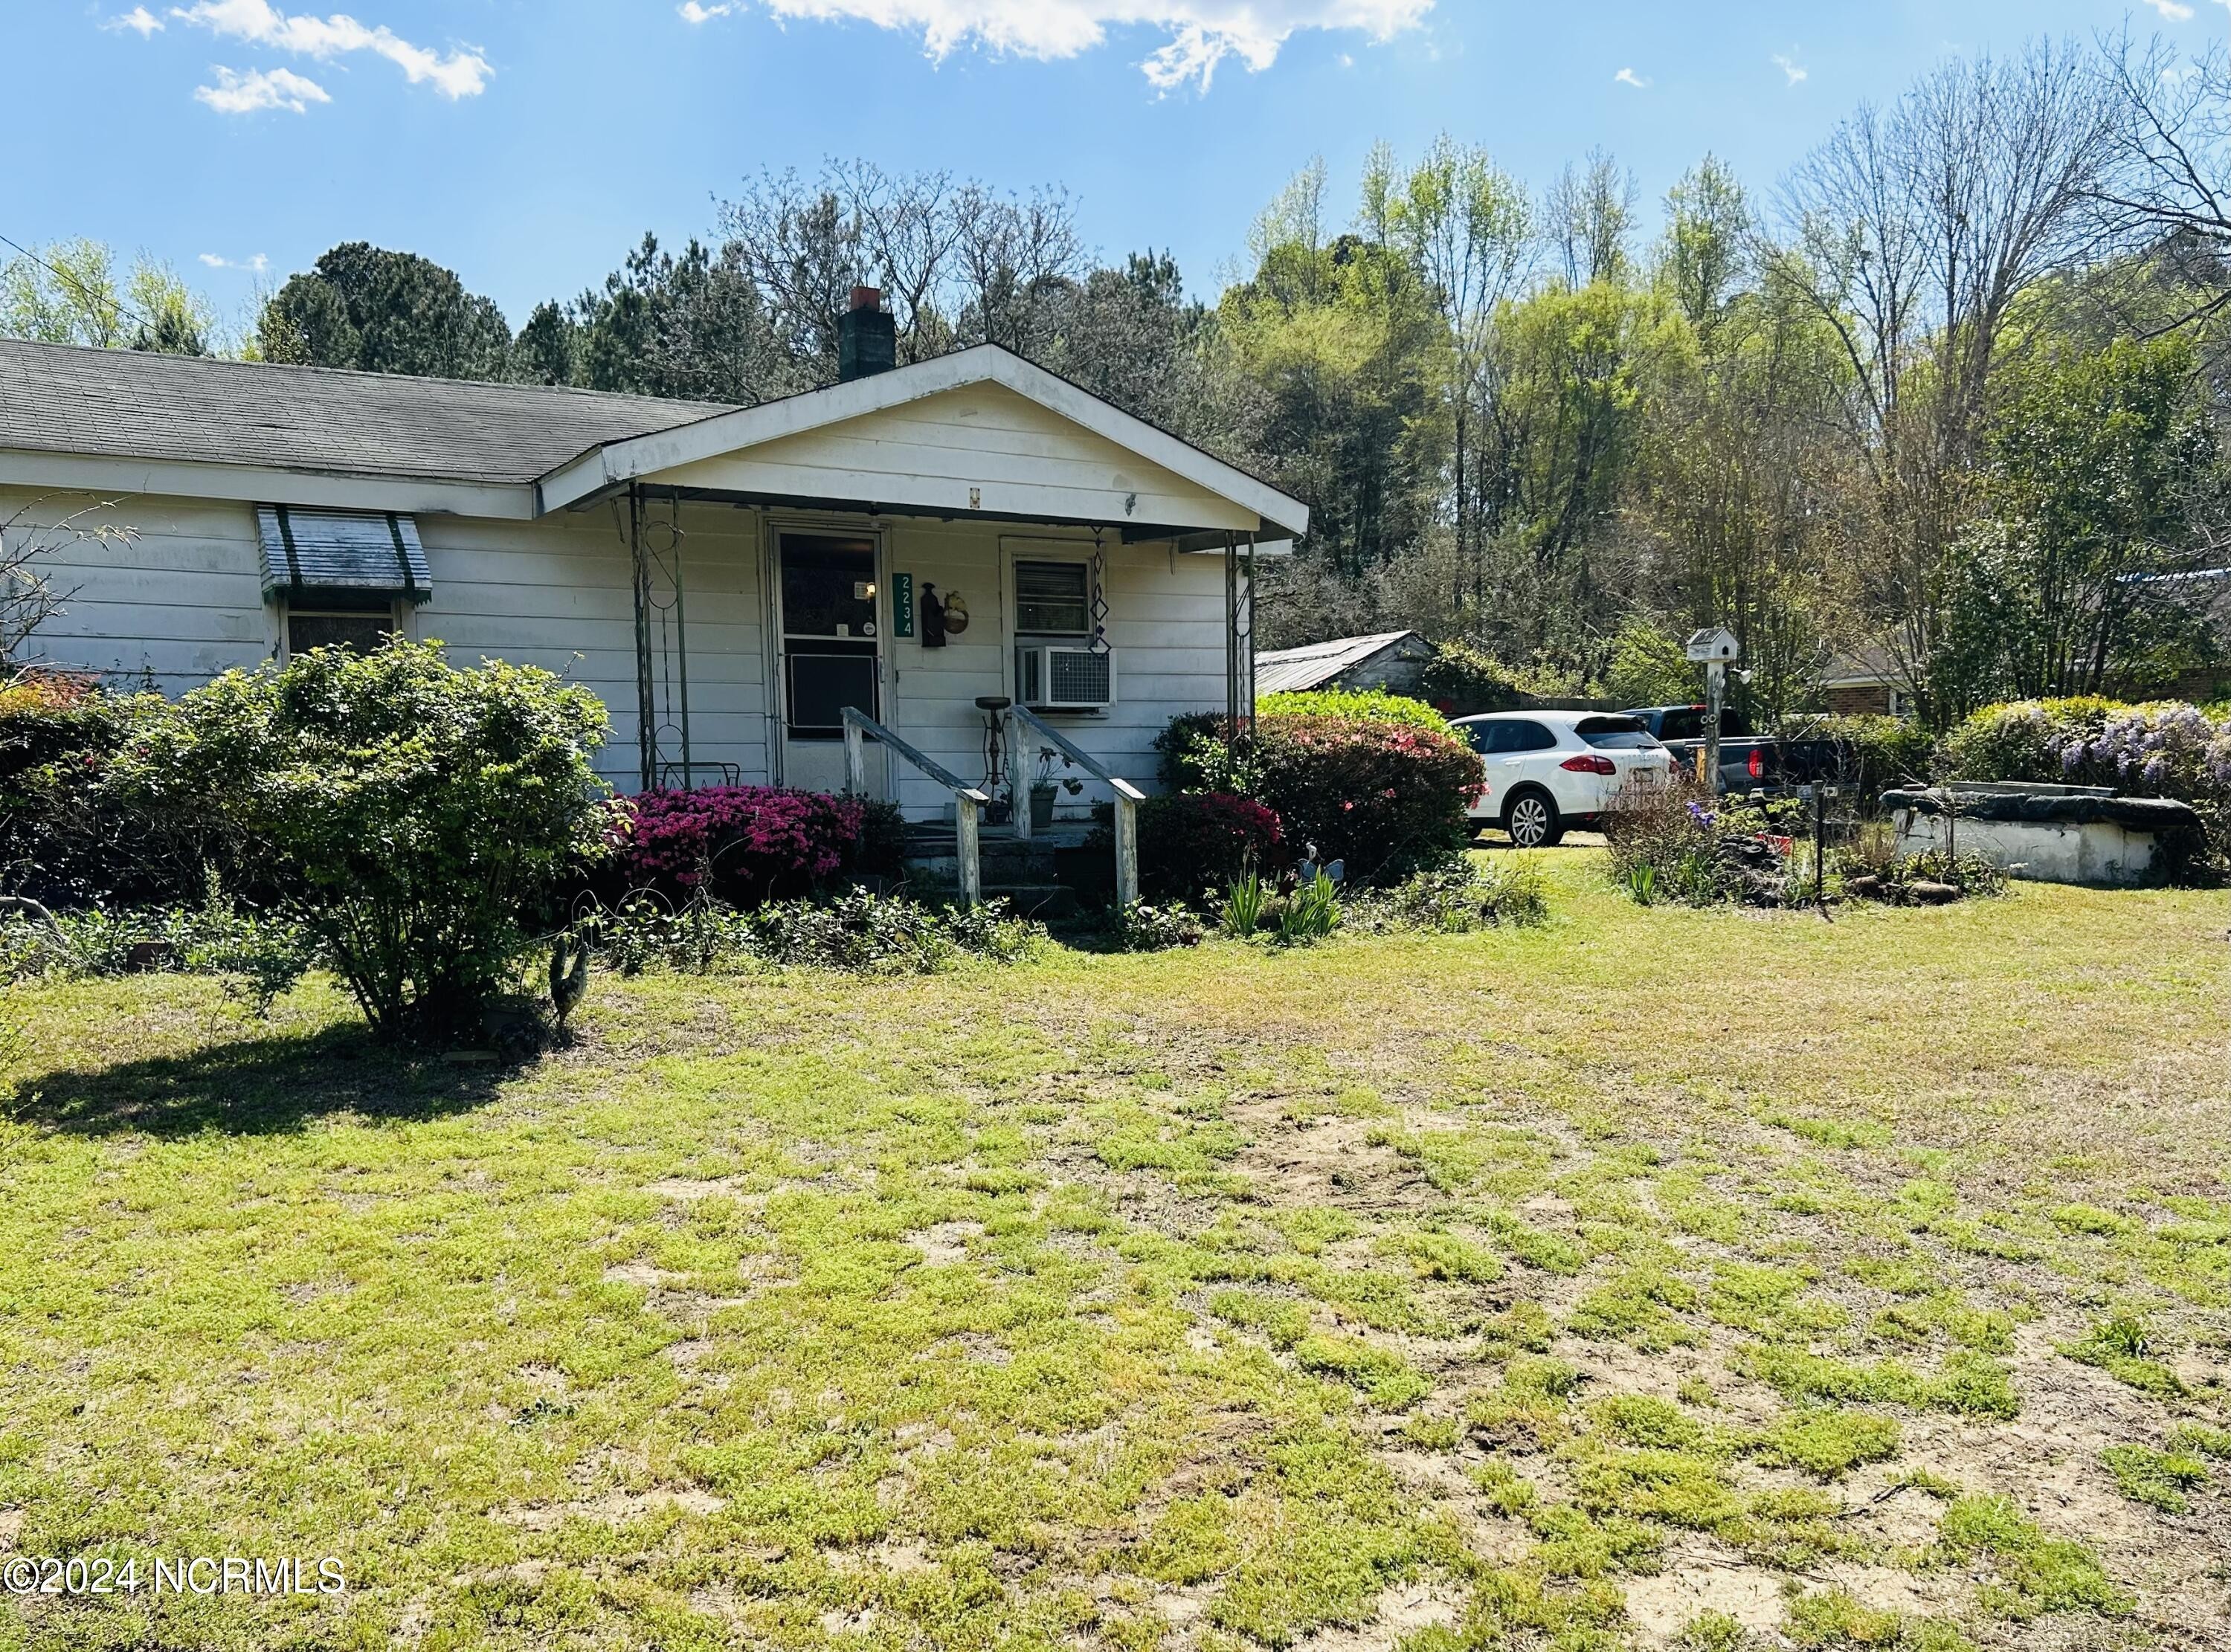 12. 2234 Pinpoint Road